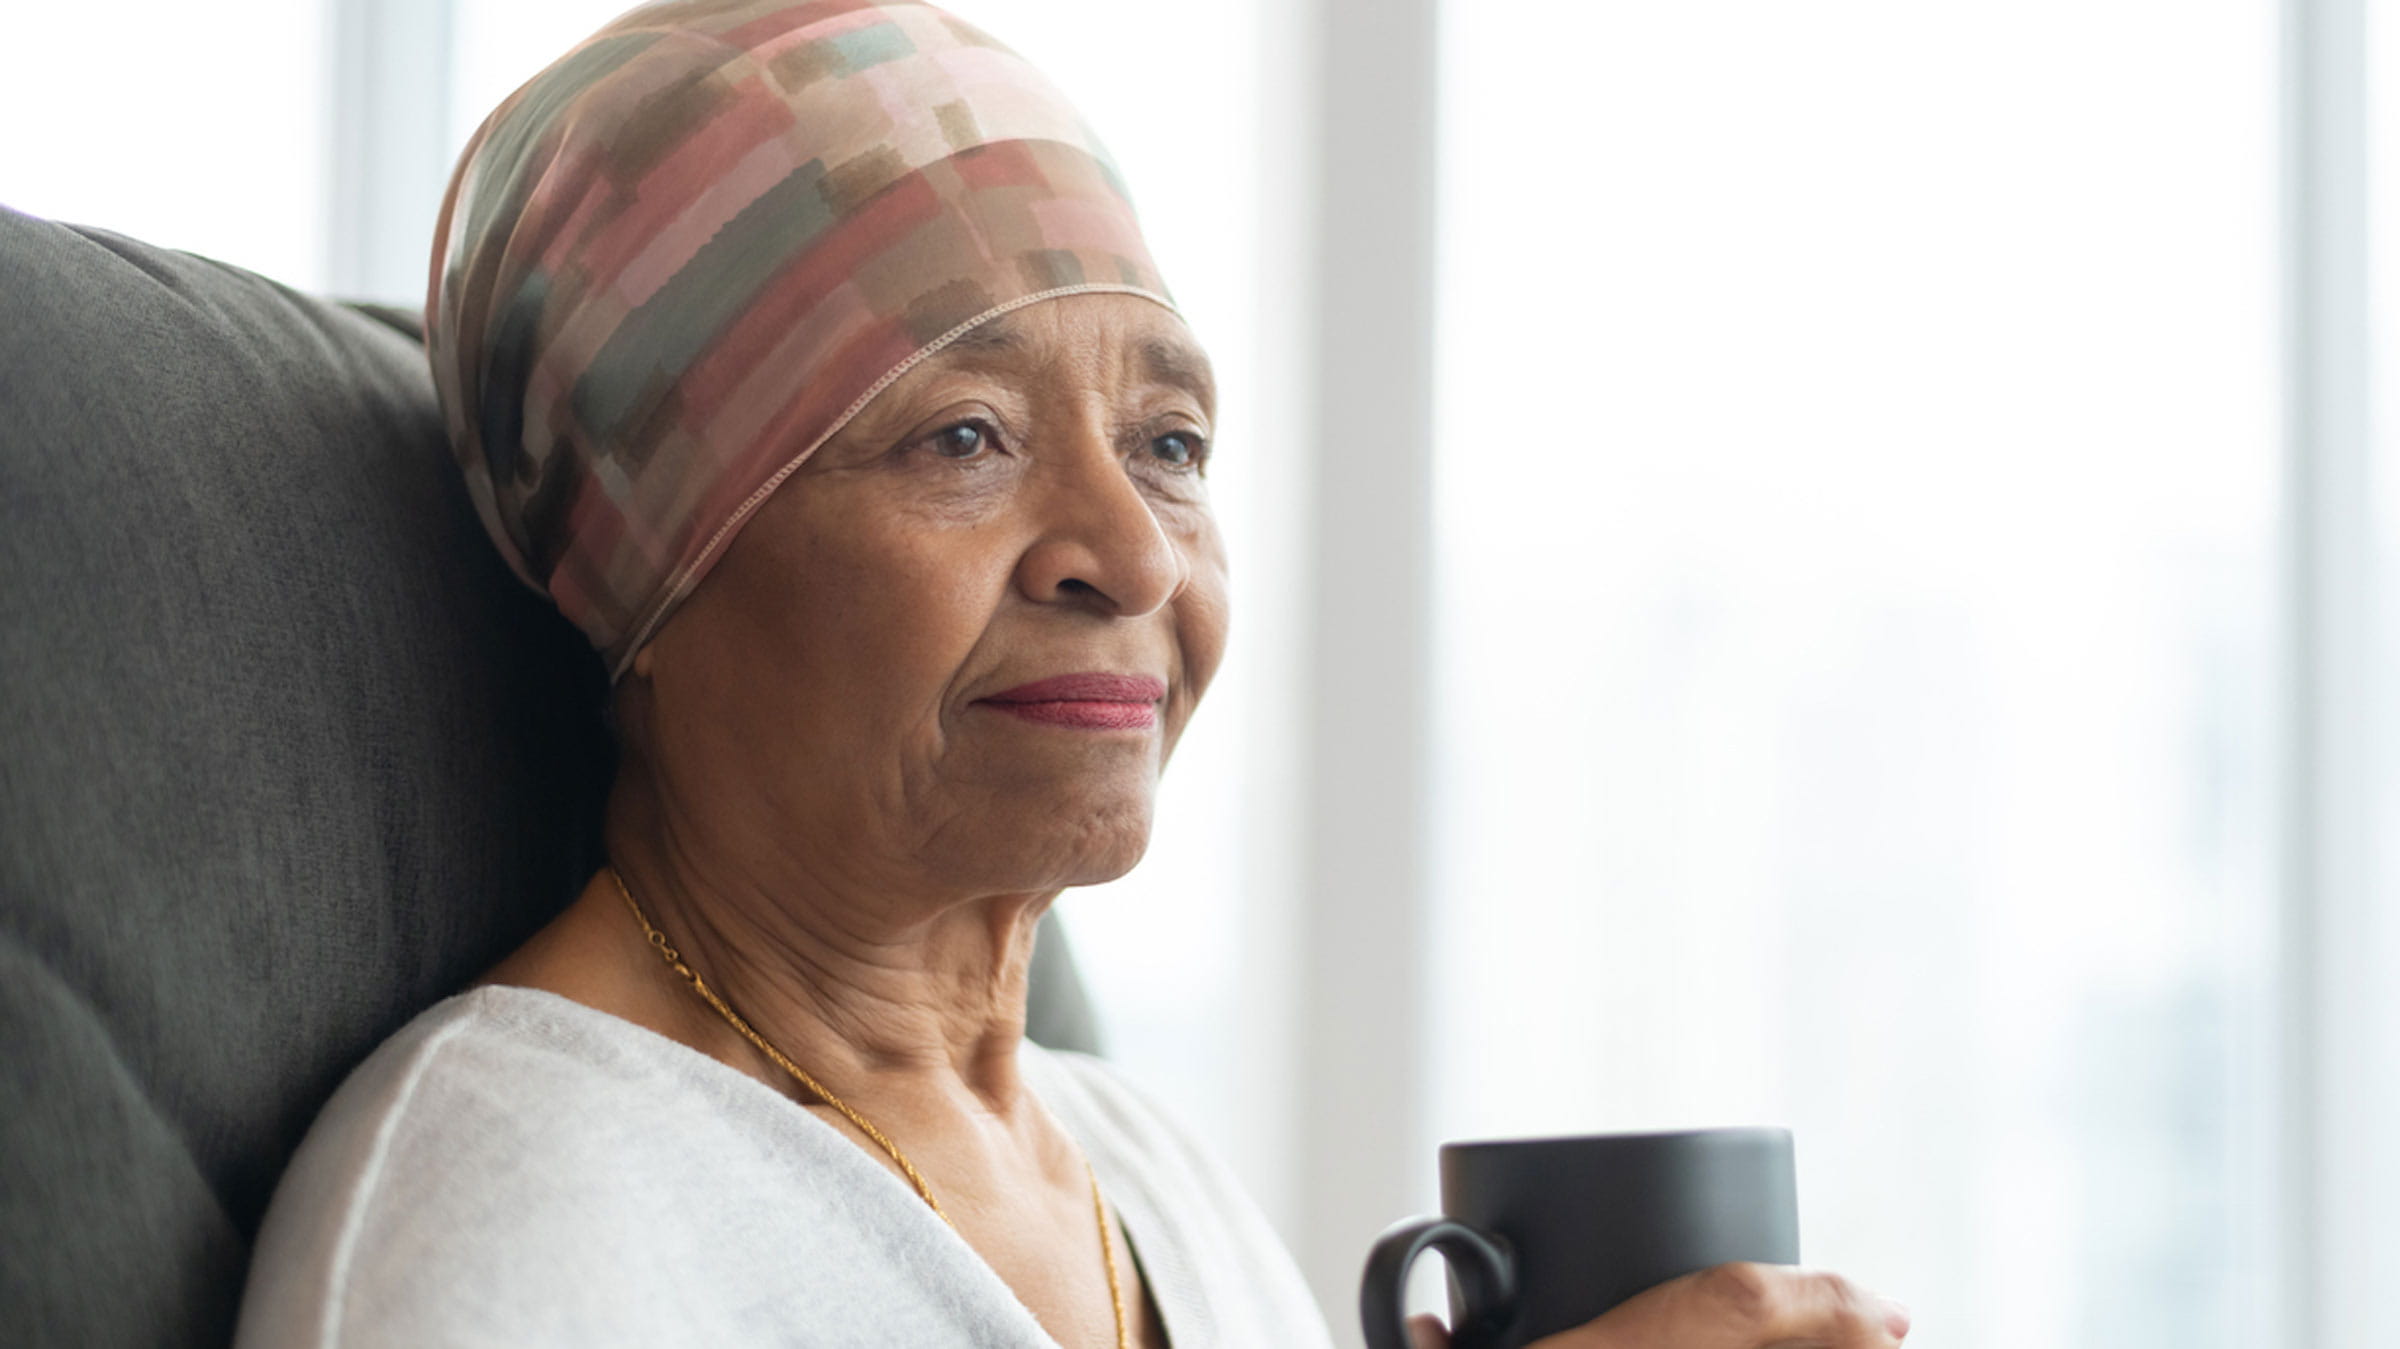 Woman with cancer drinking coffee and wearing a head scarf